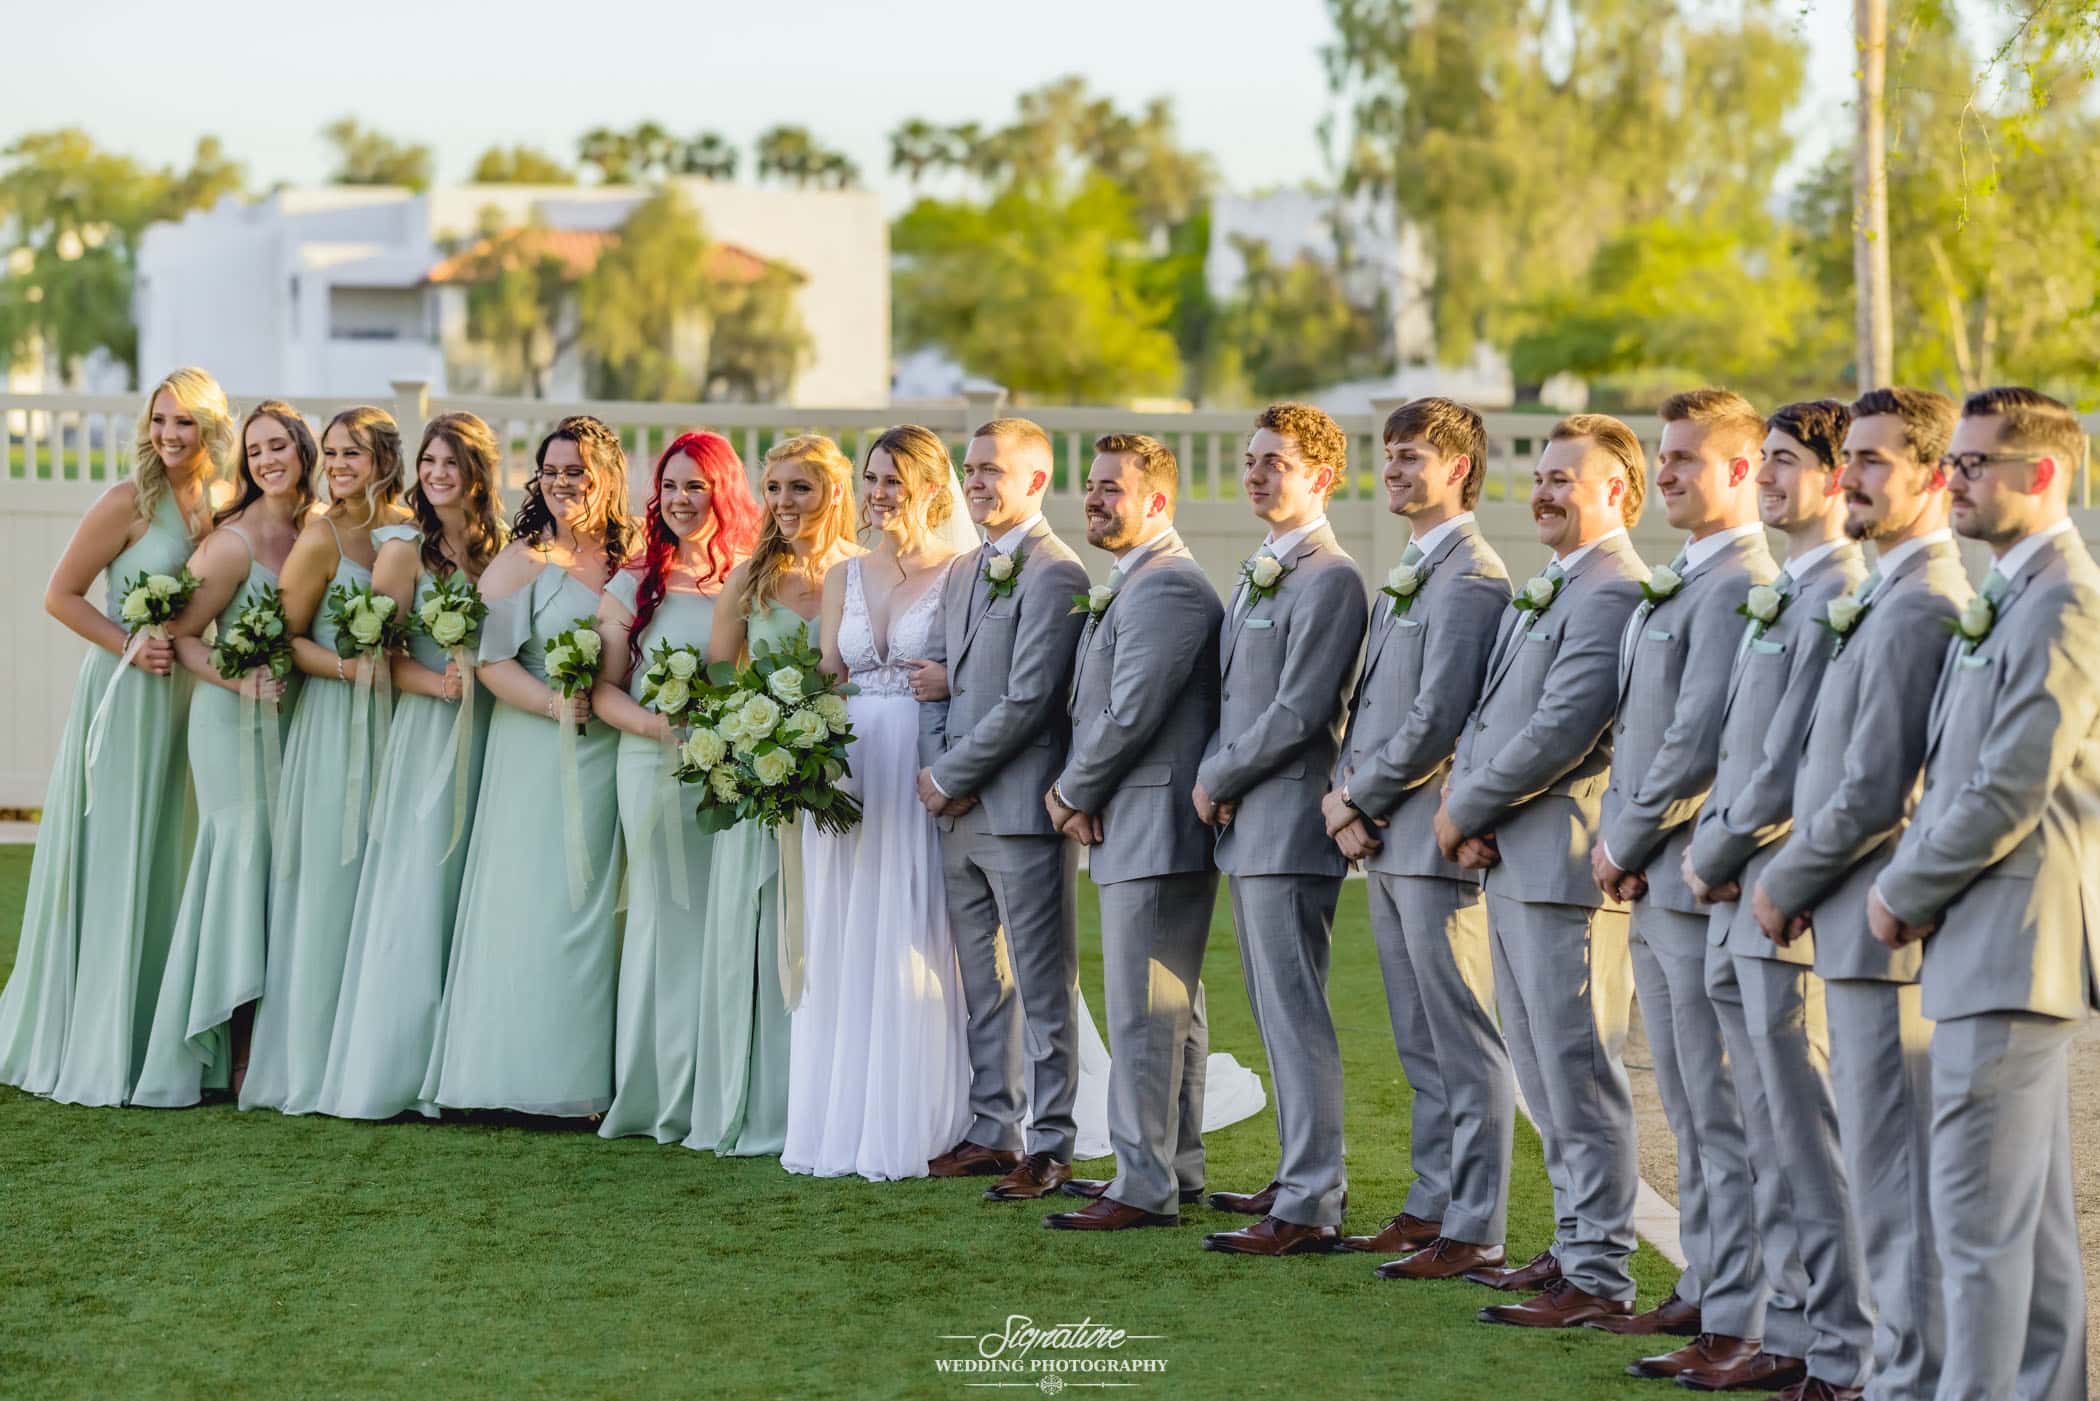 Bride and groom with wedding party smiling